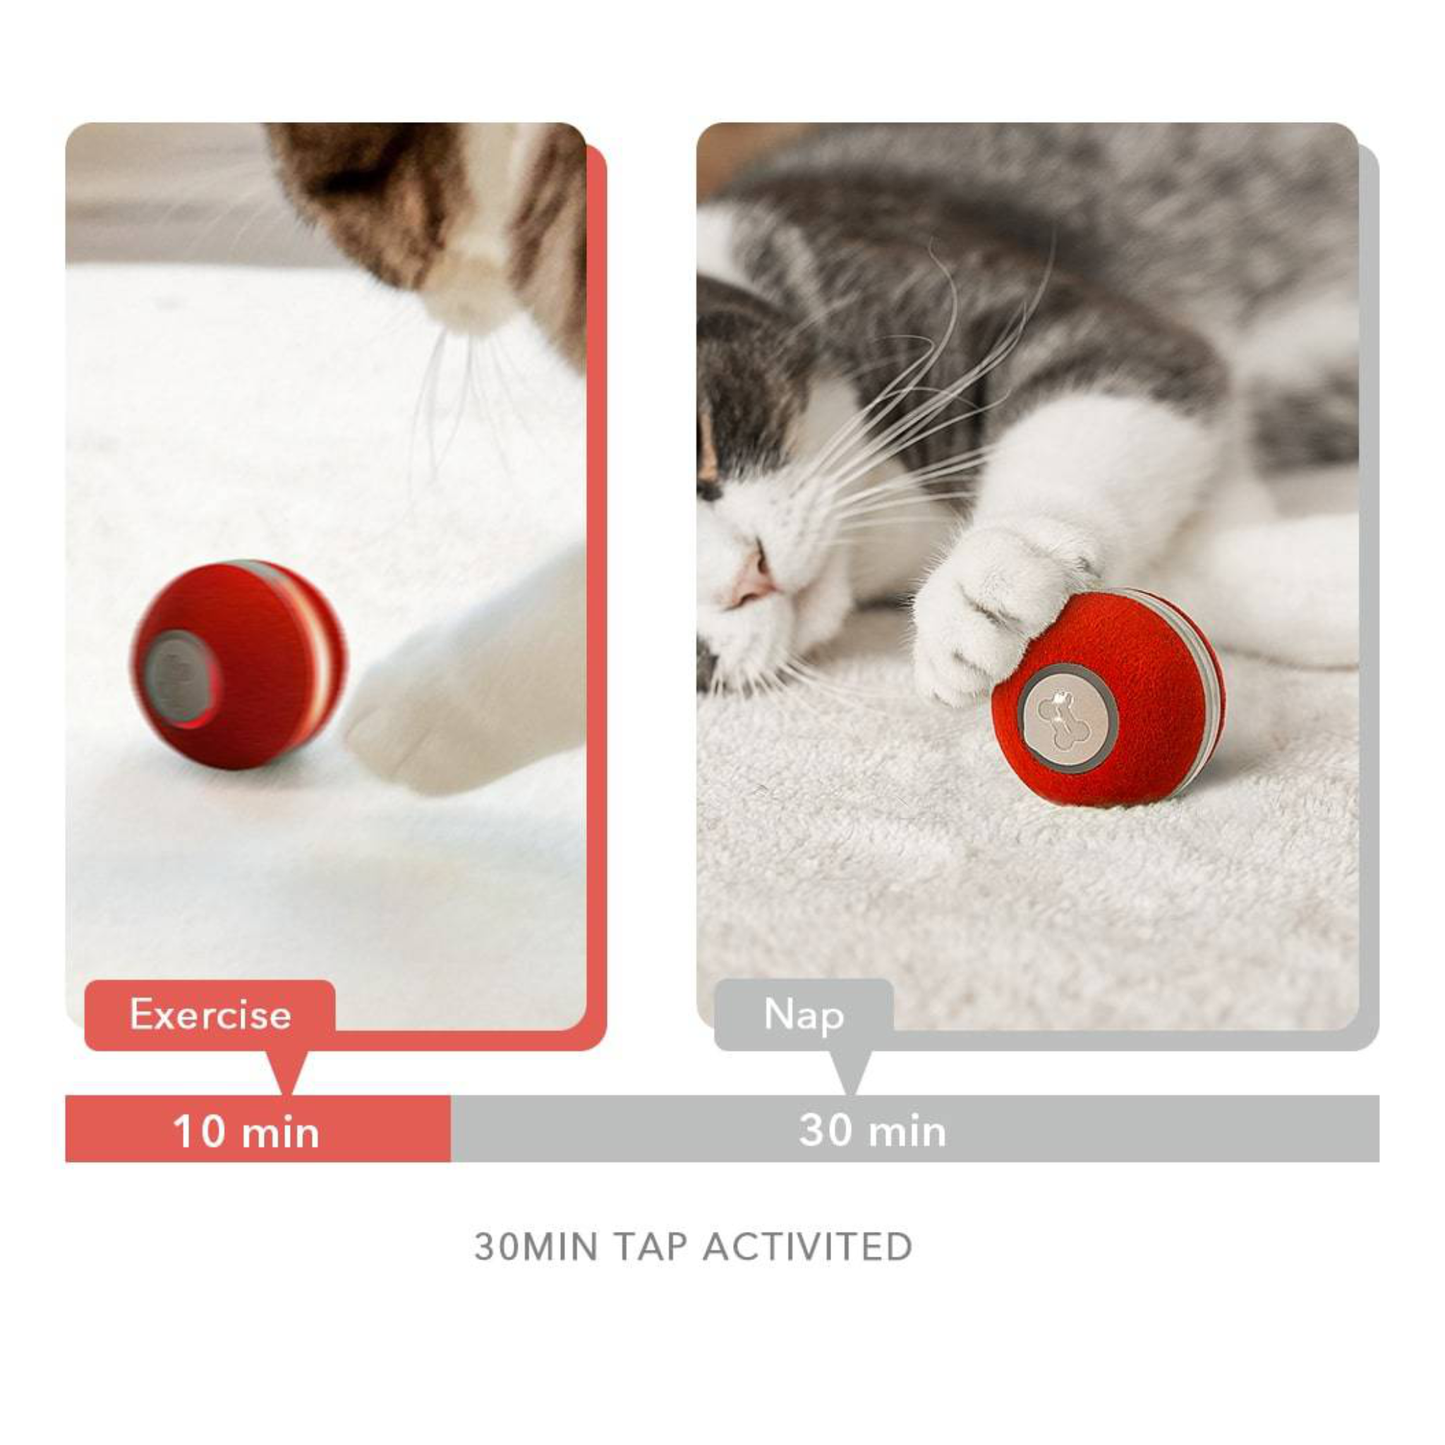 CHEERBLE Automatic Smart Interactive Cat Ball Toy